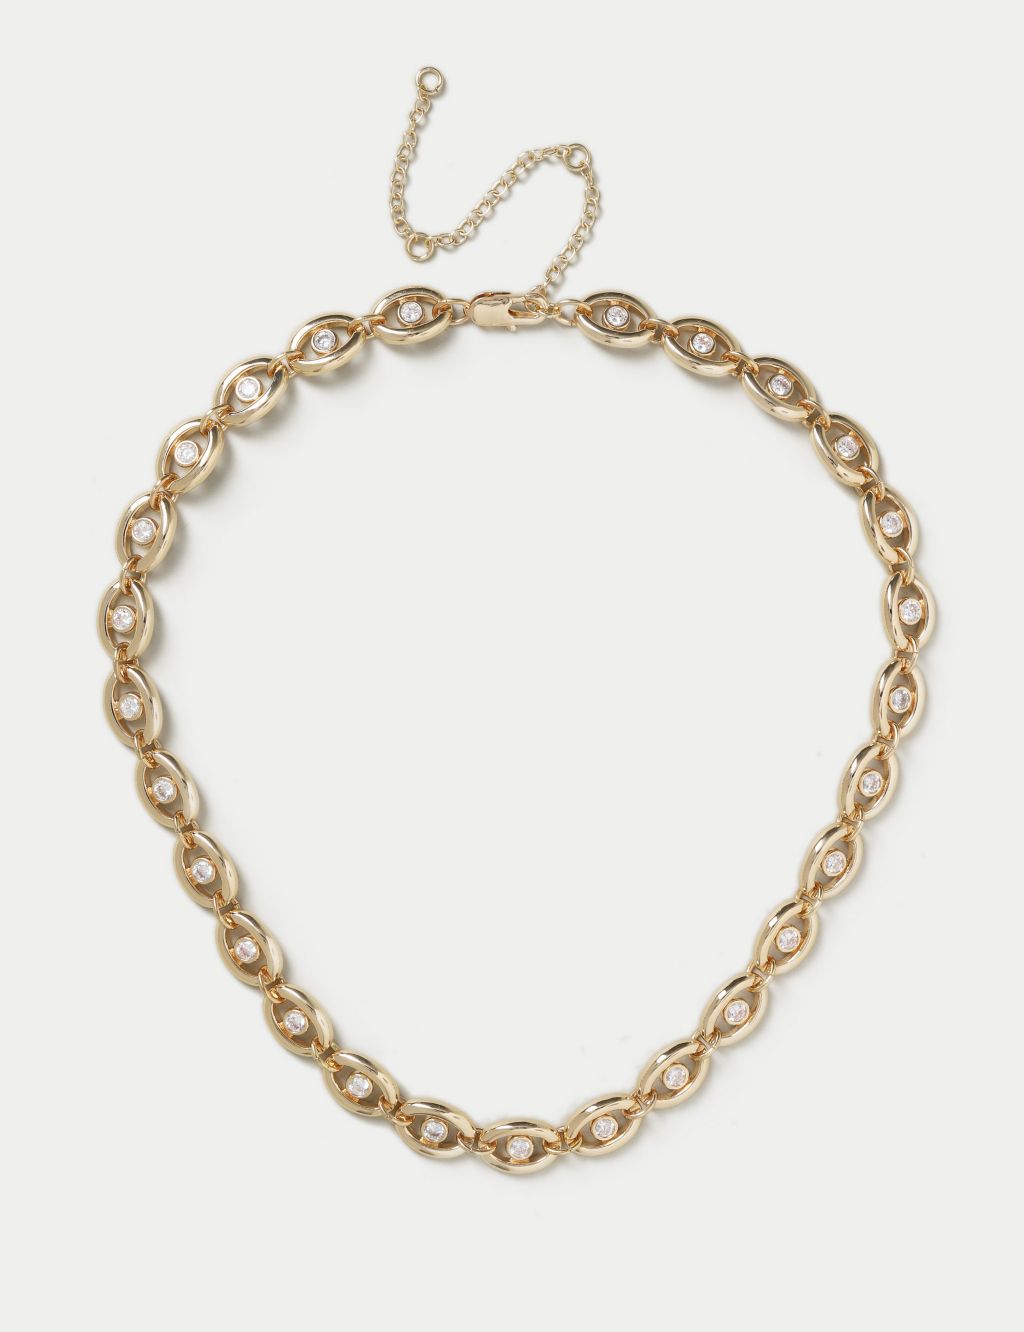 Autograph Gold Link Chain with CZ